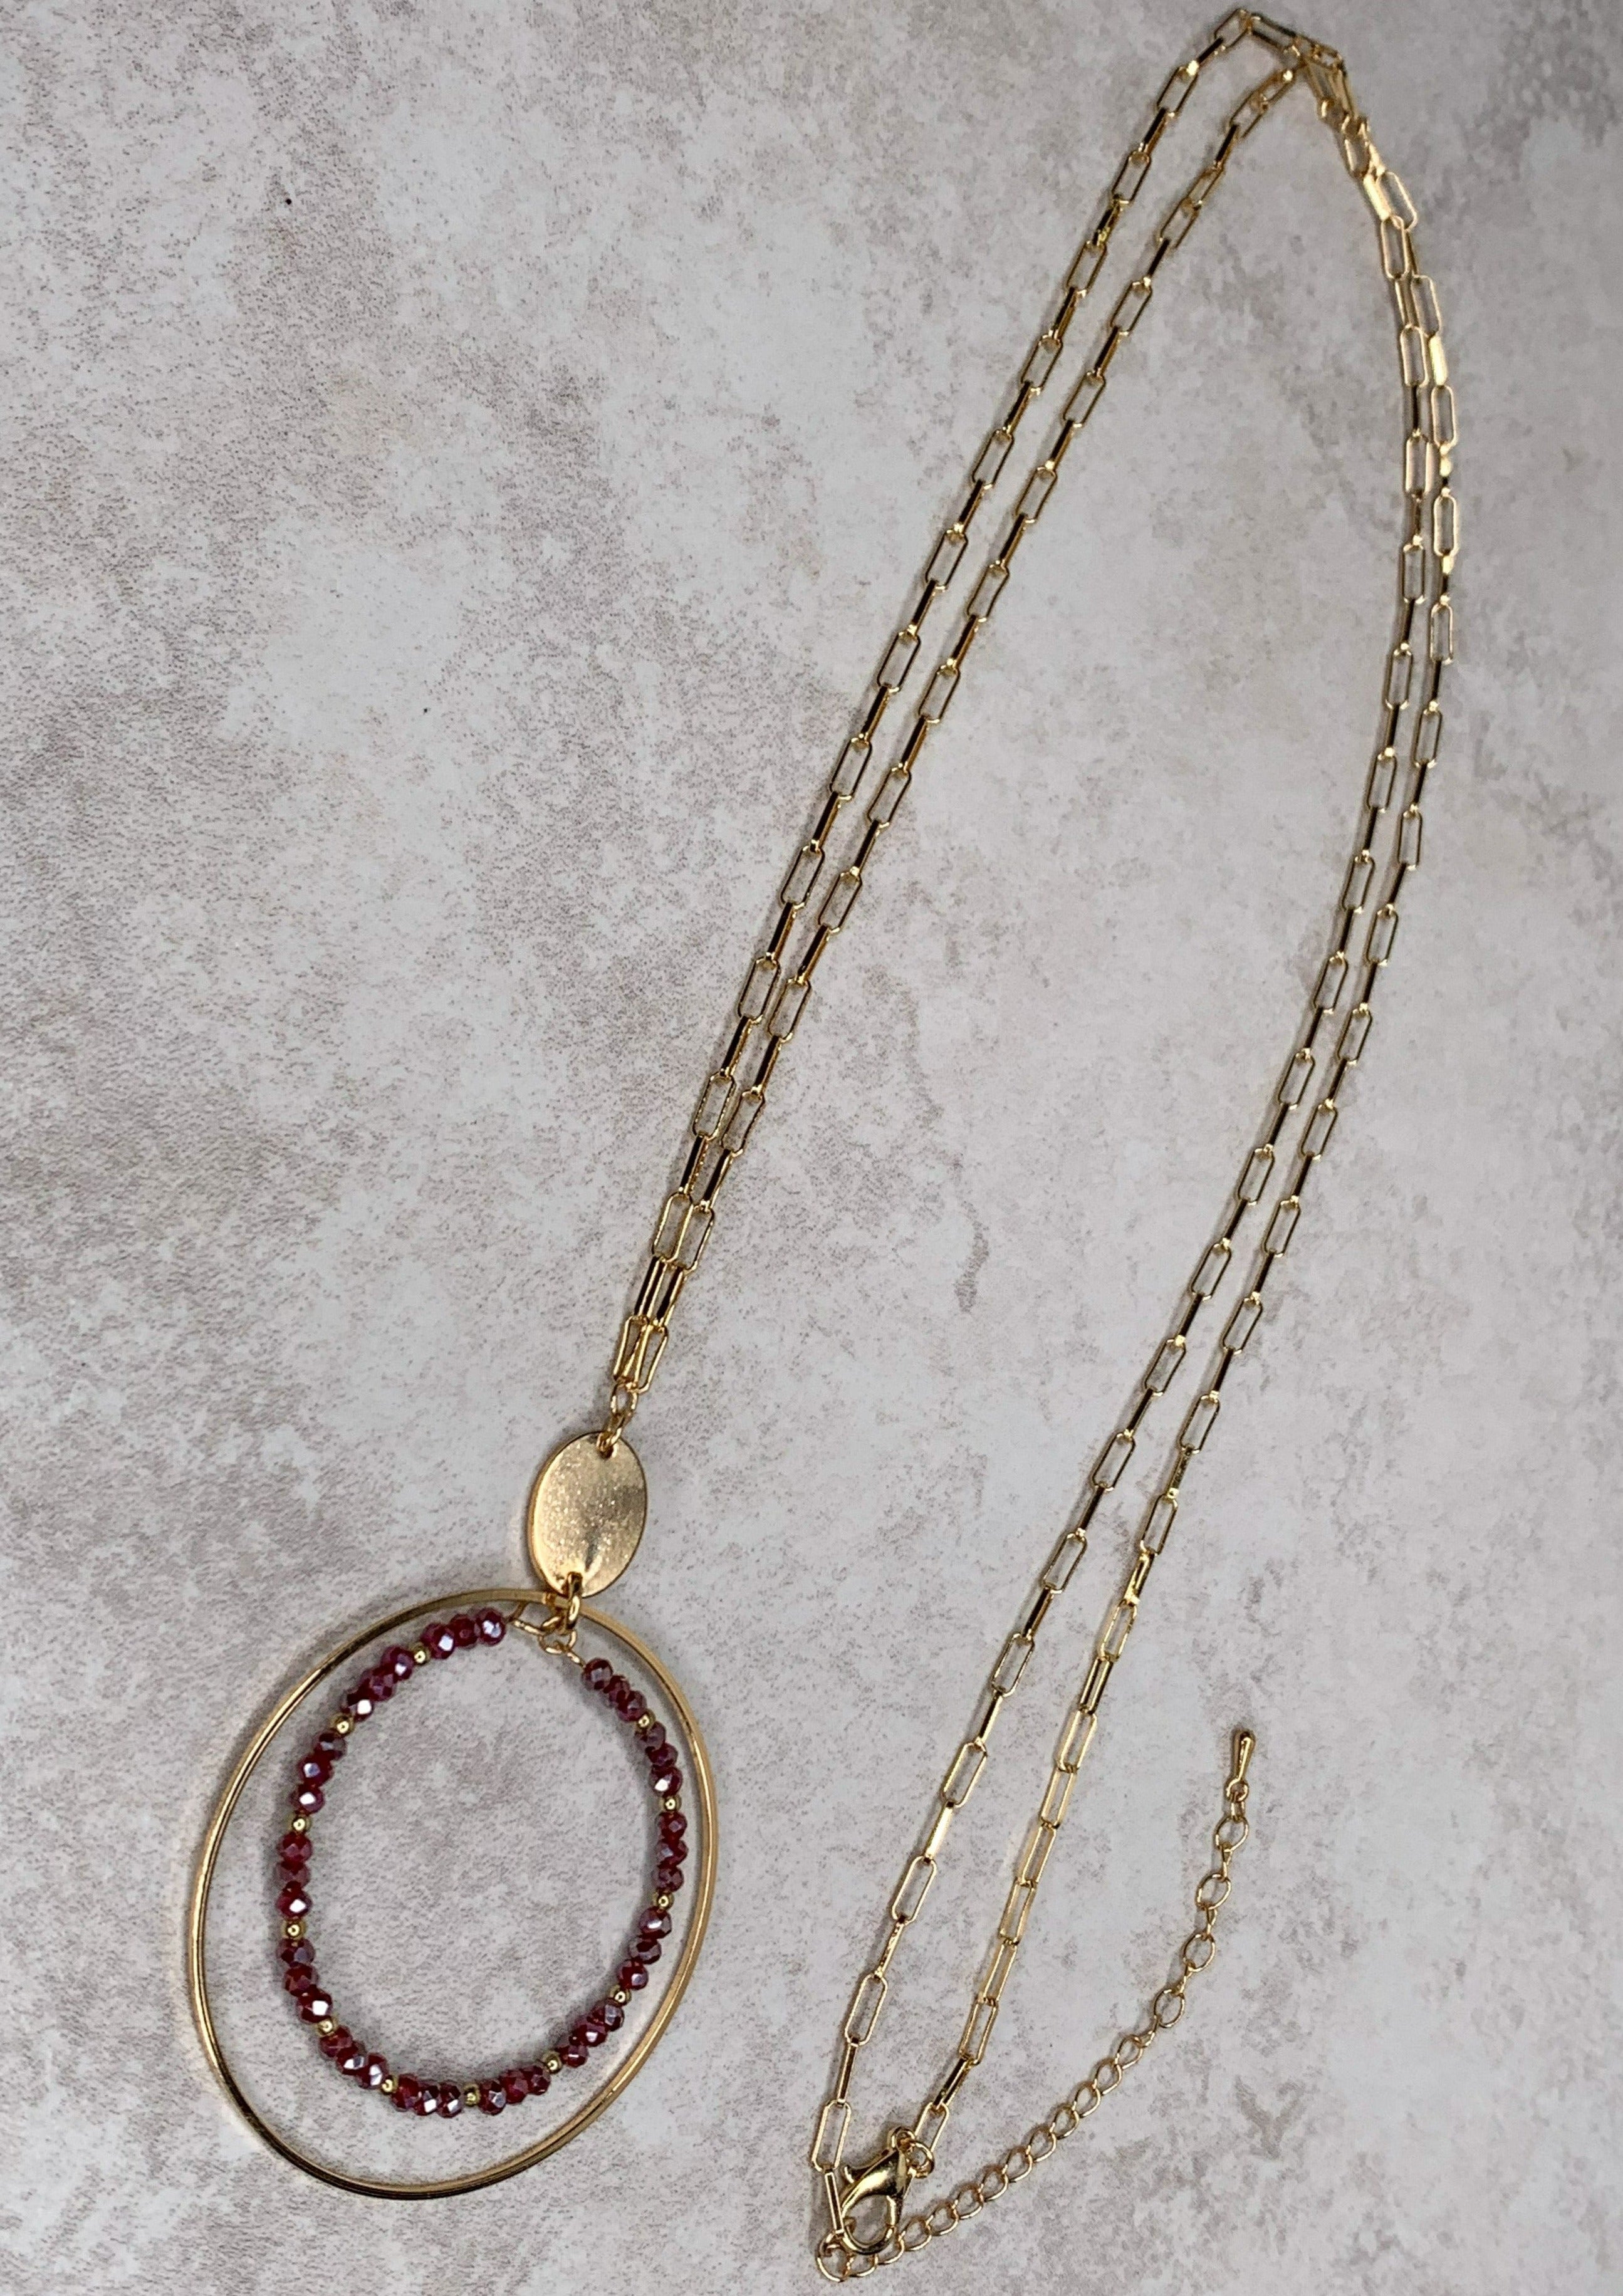 Gold Circle Necklace with Wine Beads